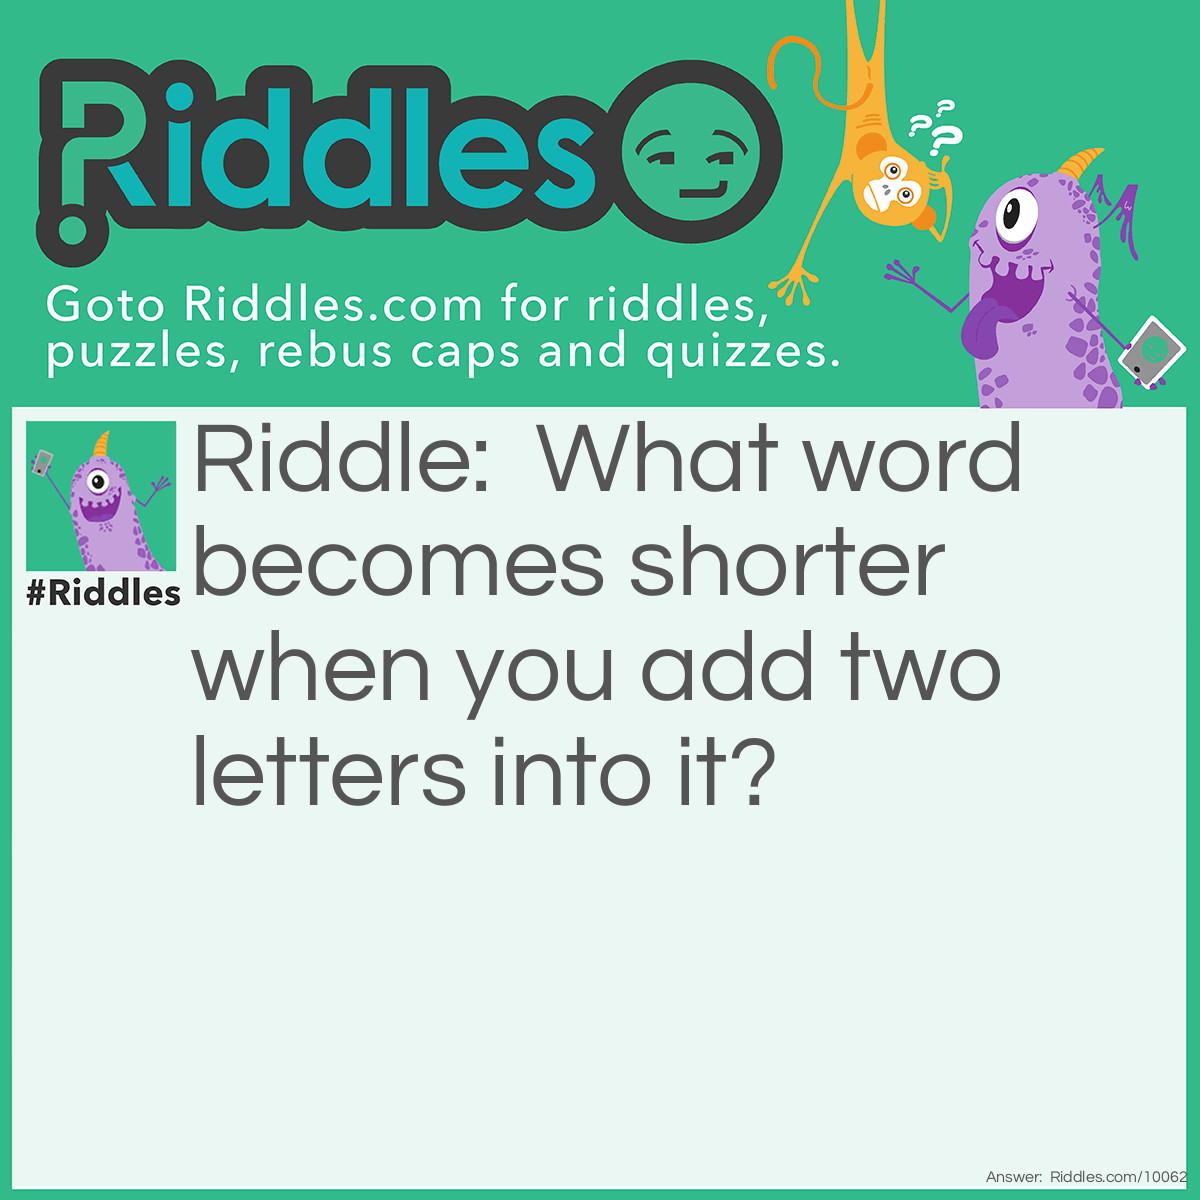 Riddle: What word becomes shorter when you add two letters into it? Answer: The word "short".